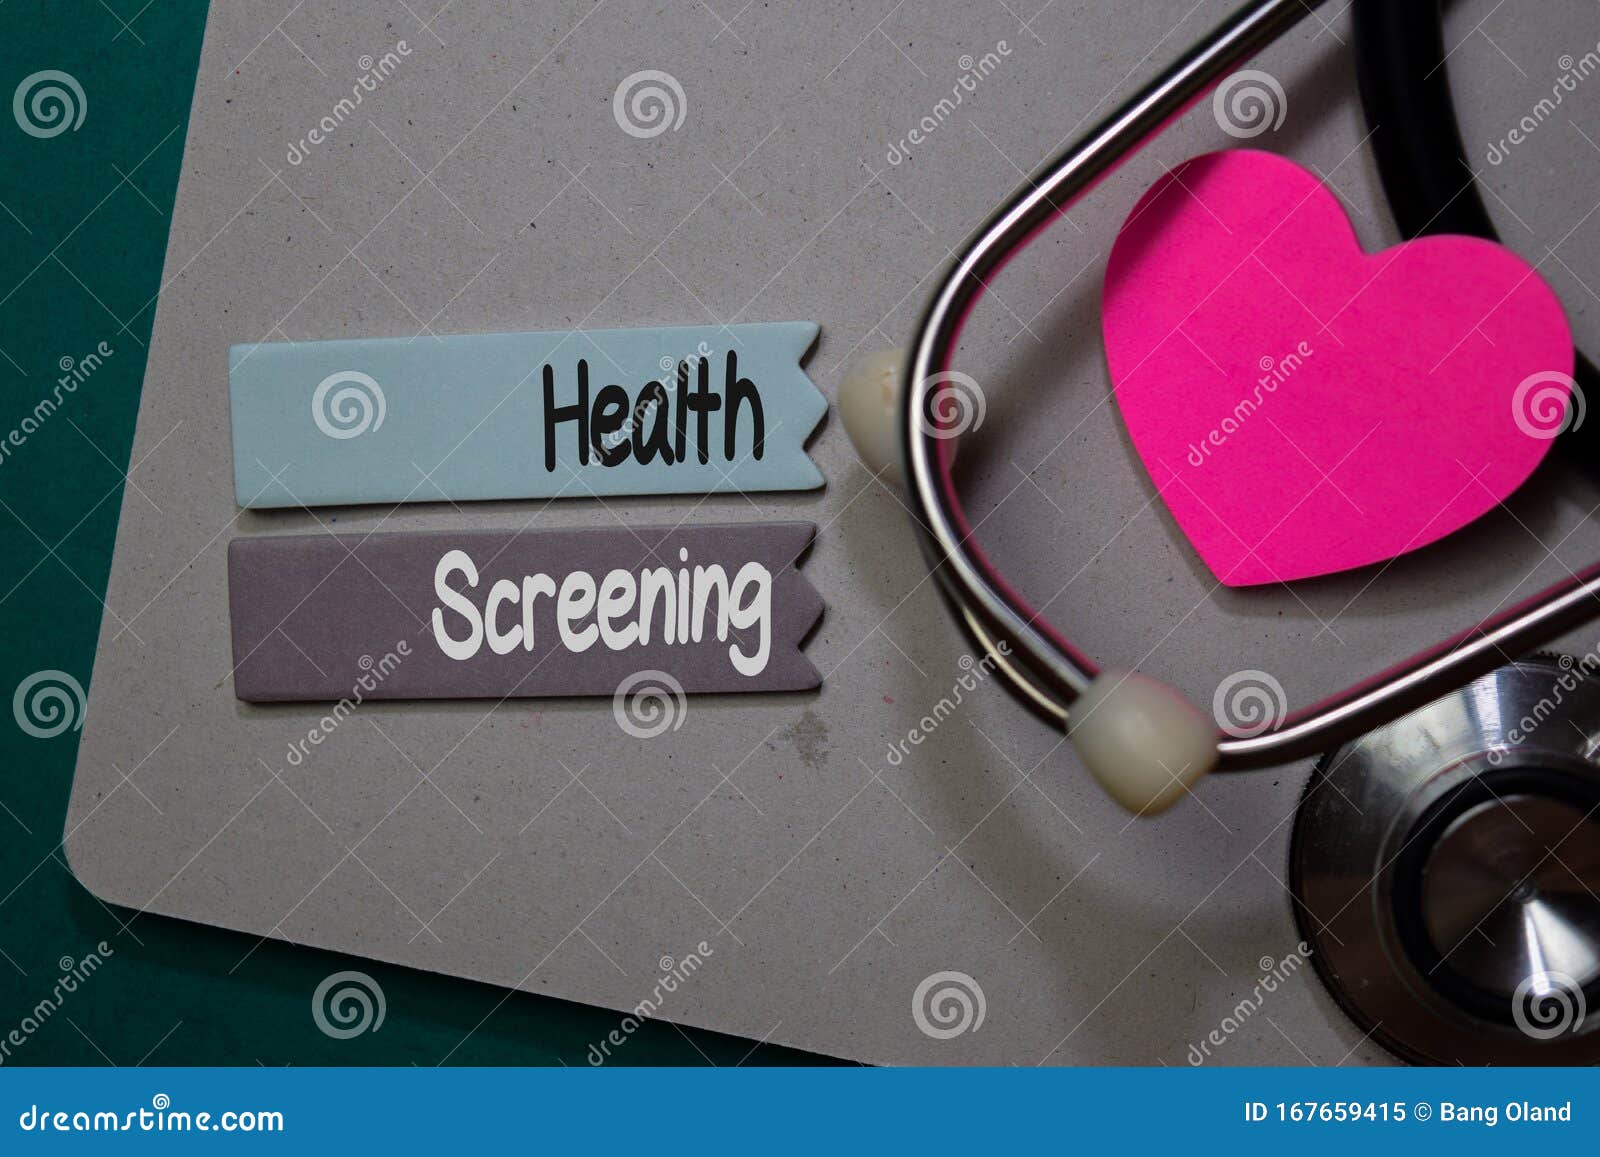 health screening write on stick note  on office desk. healthcare concept